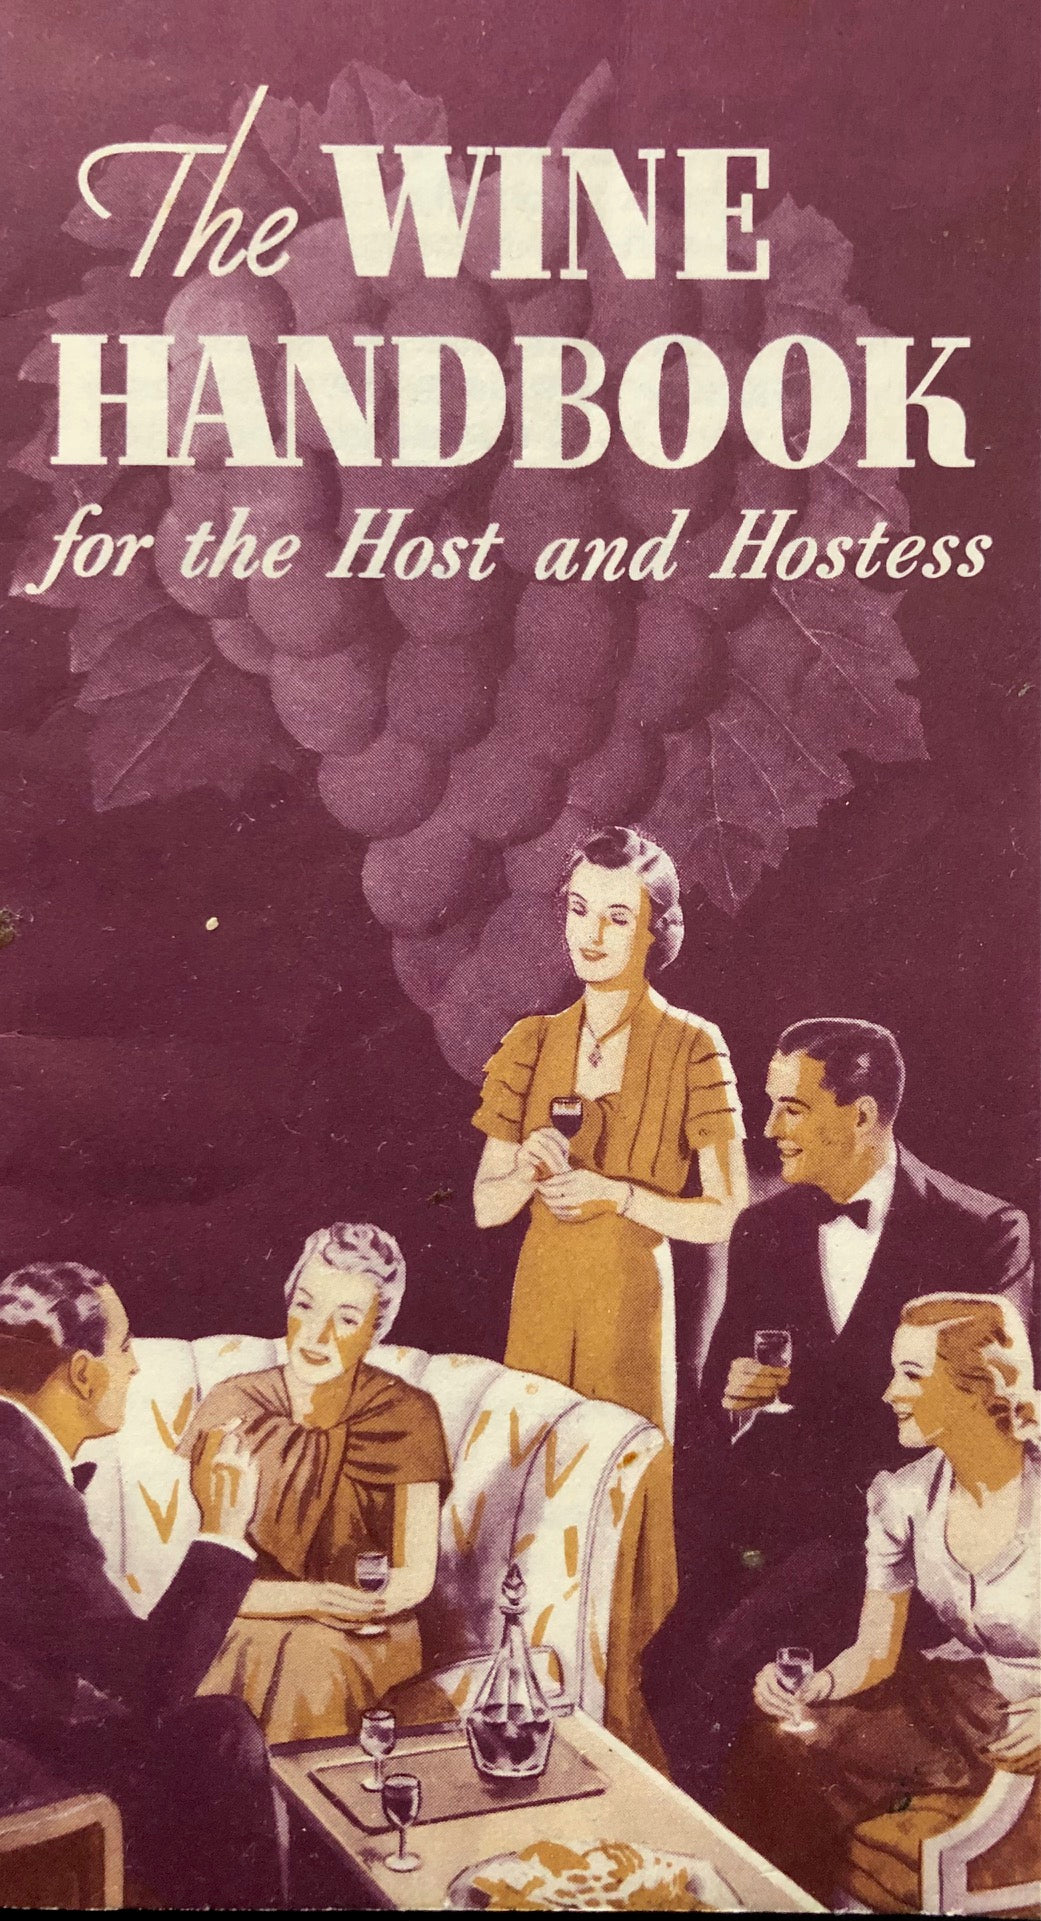 (California - Wine) The Wine Handbook for the Host and Hostess.